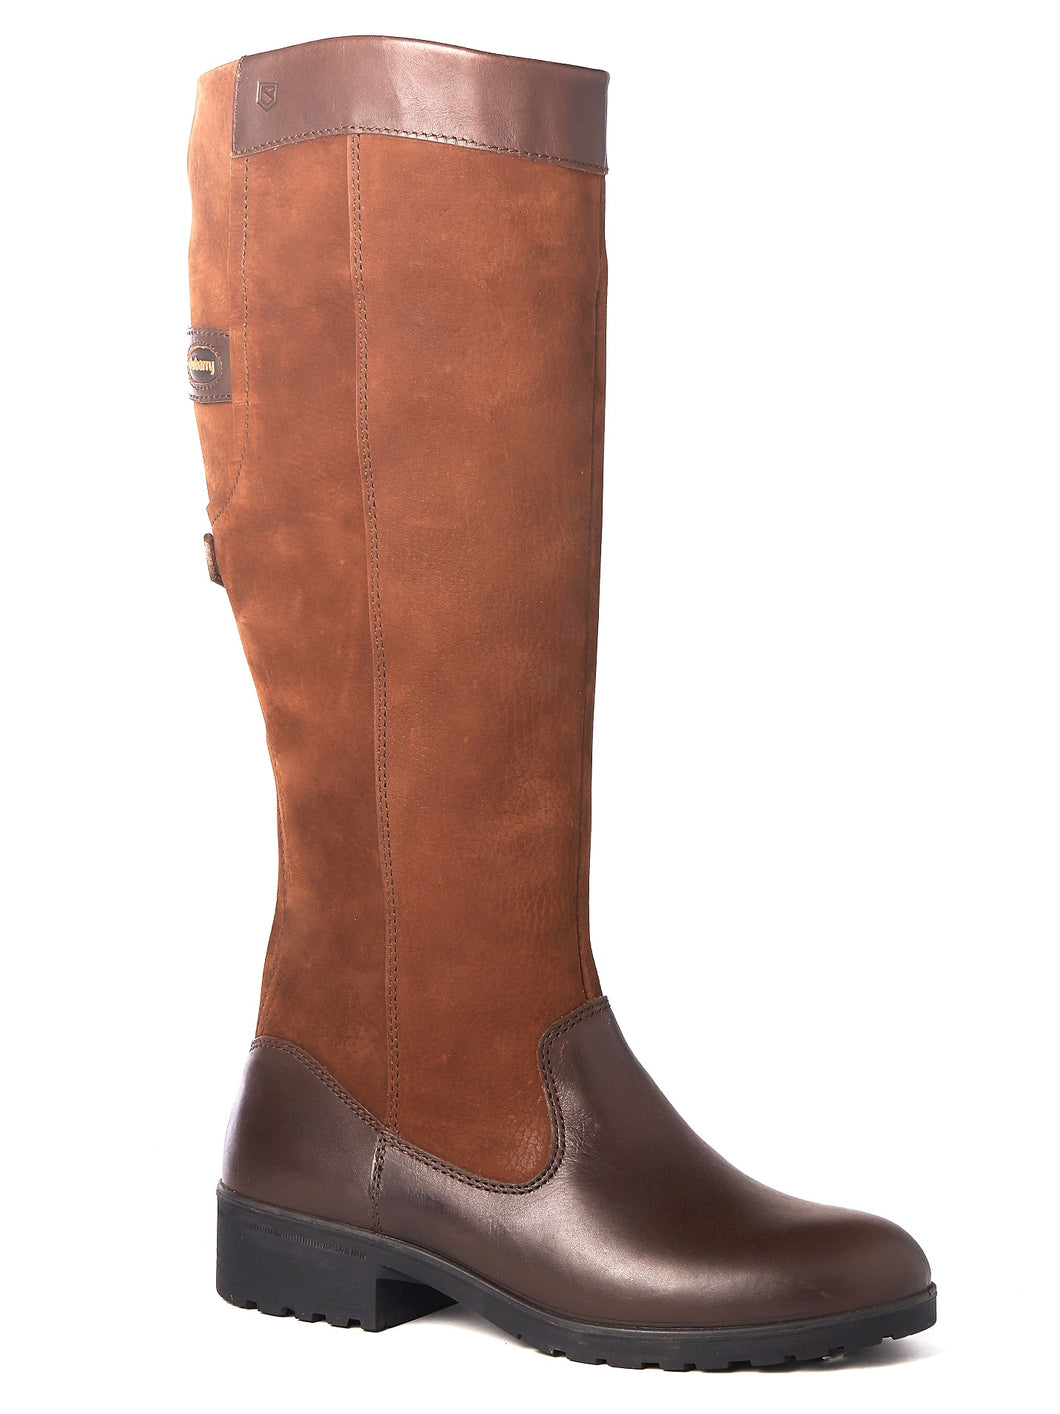 DUBARRY Clare Boots - Ladies Waterproof Gore-Tex Leather - Walnut